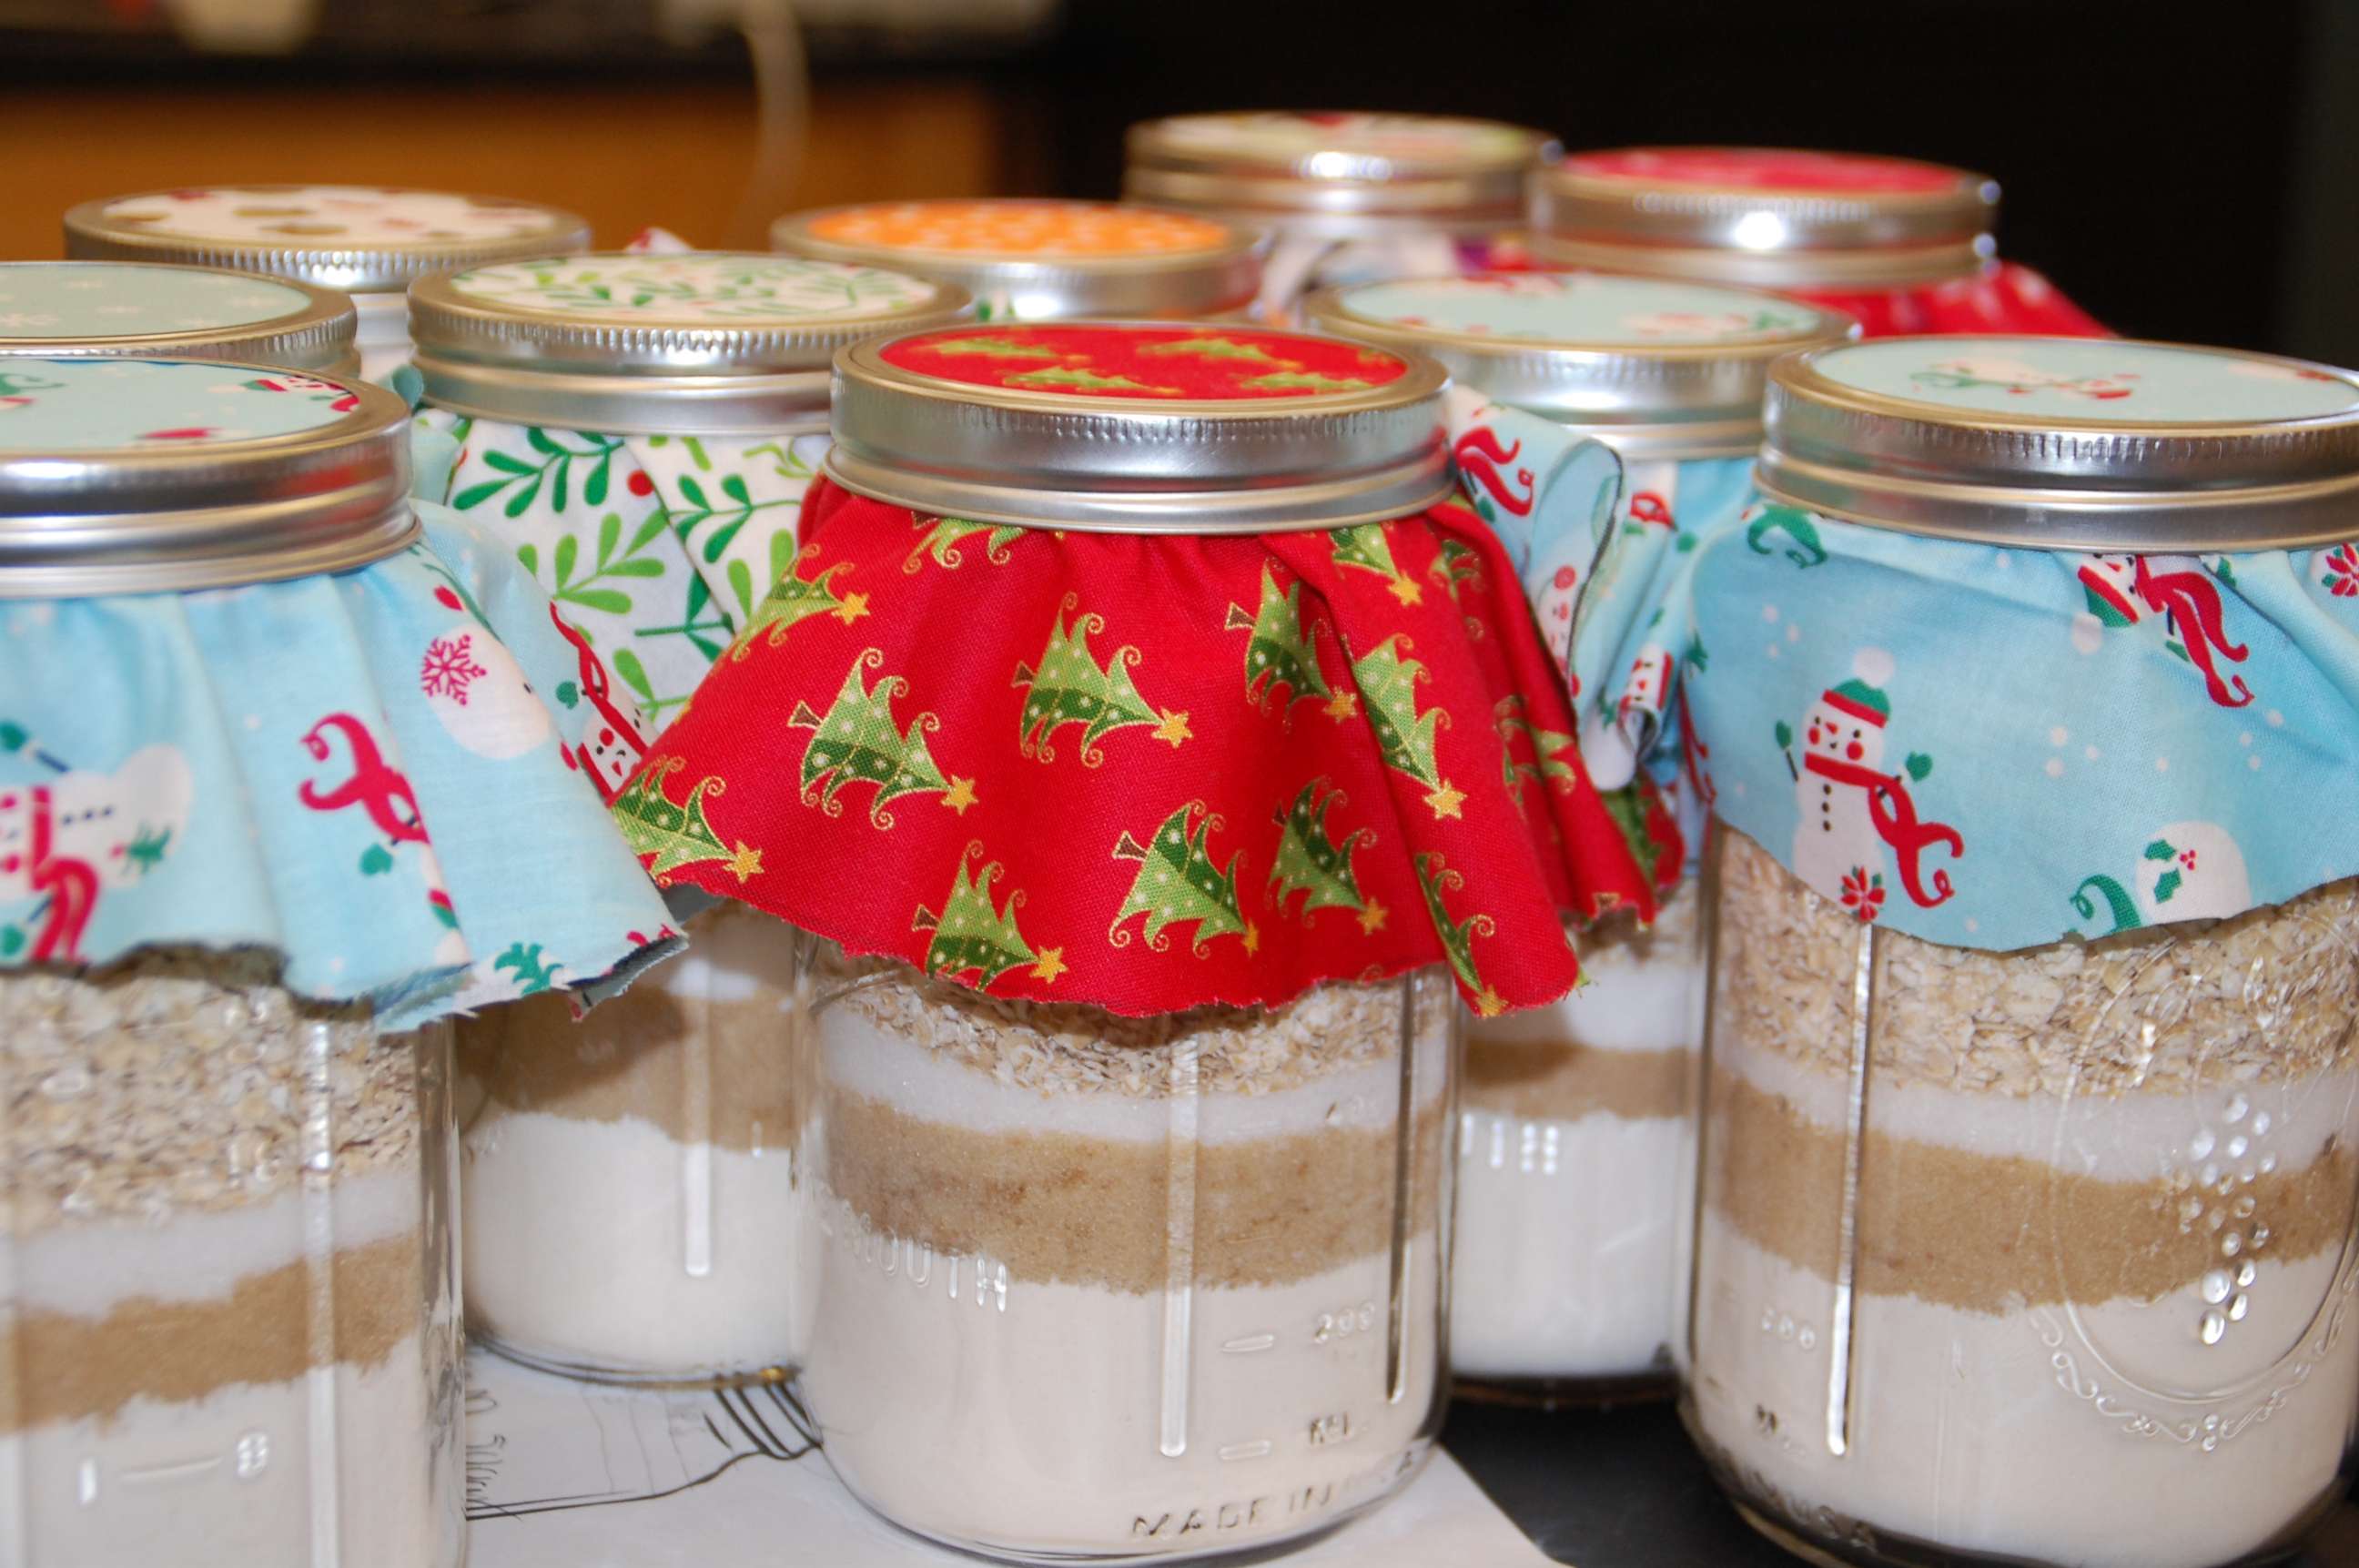 PHOTO: The math and science classes at Ipswich Middle School in Massachusetts decided to make 300 jars of cookie mix and donate the money to CMT4J research for classmate Talia Duff. 